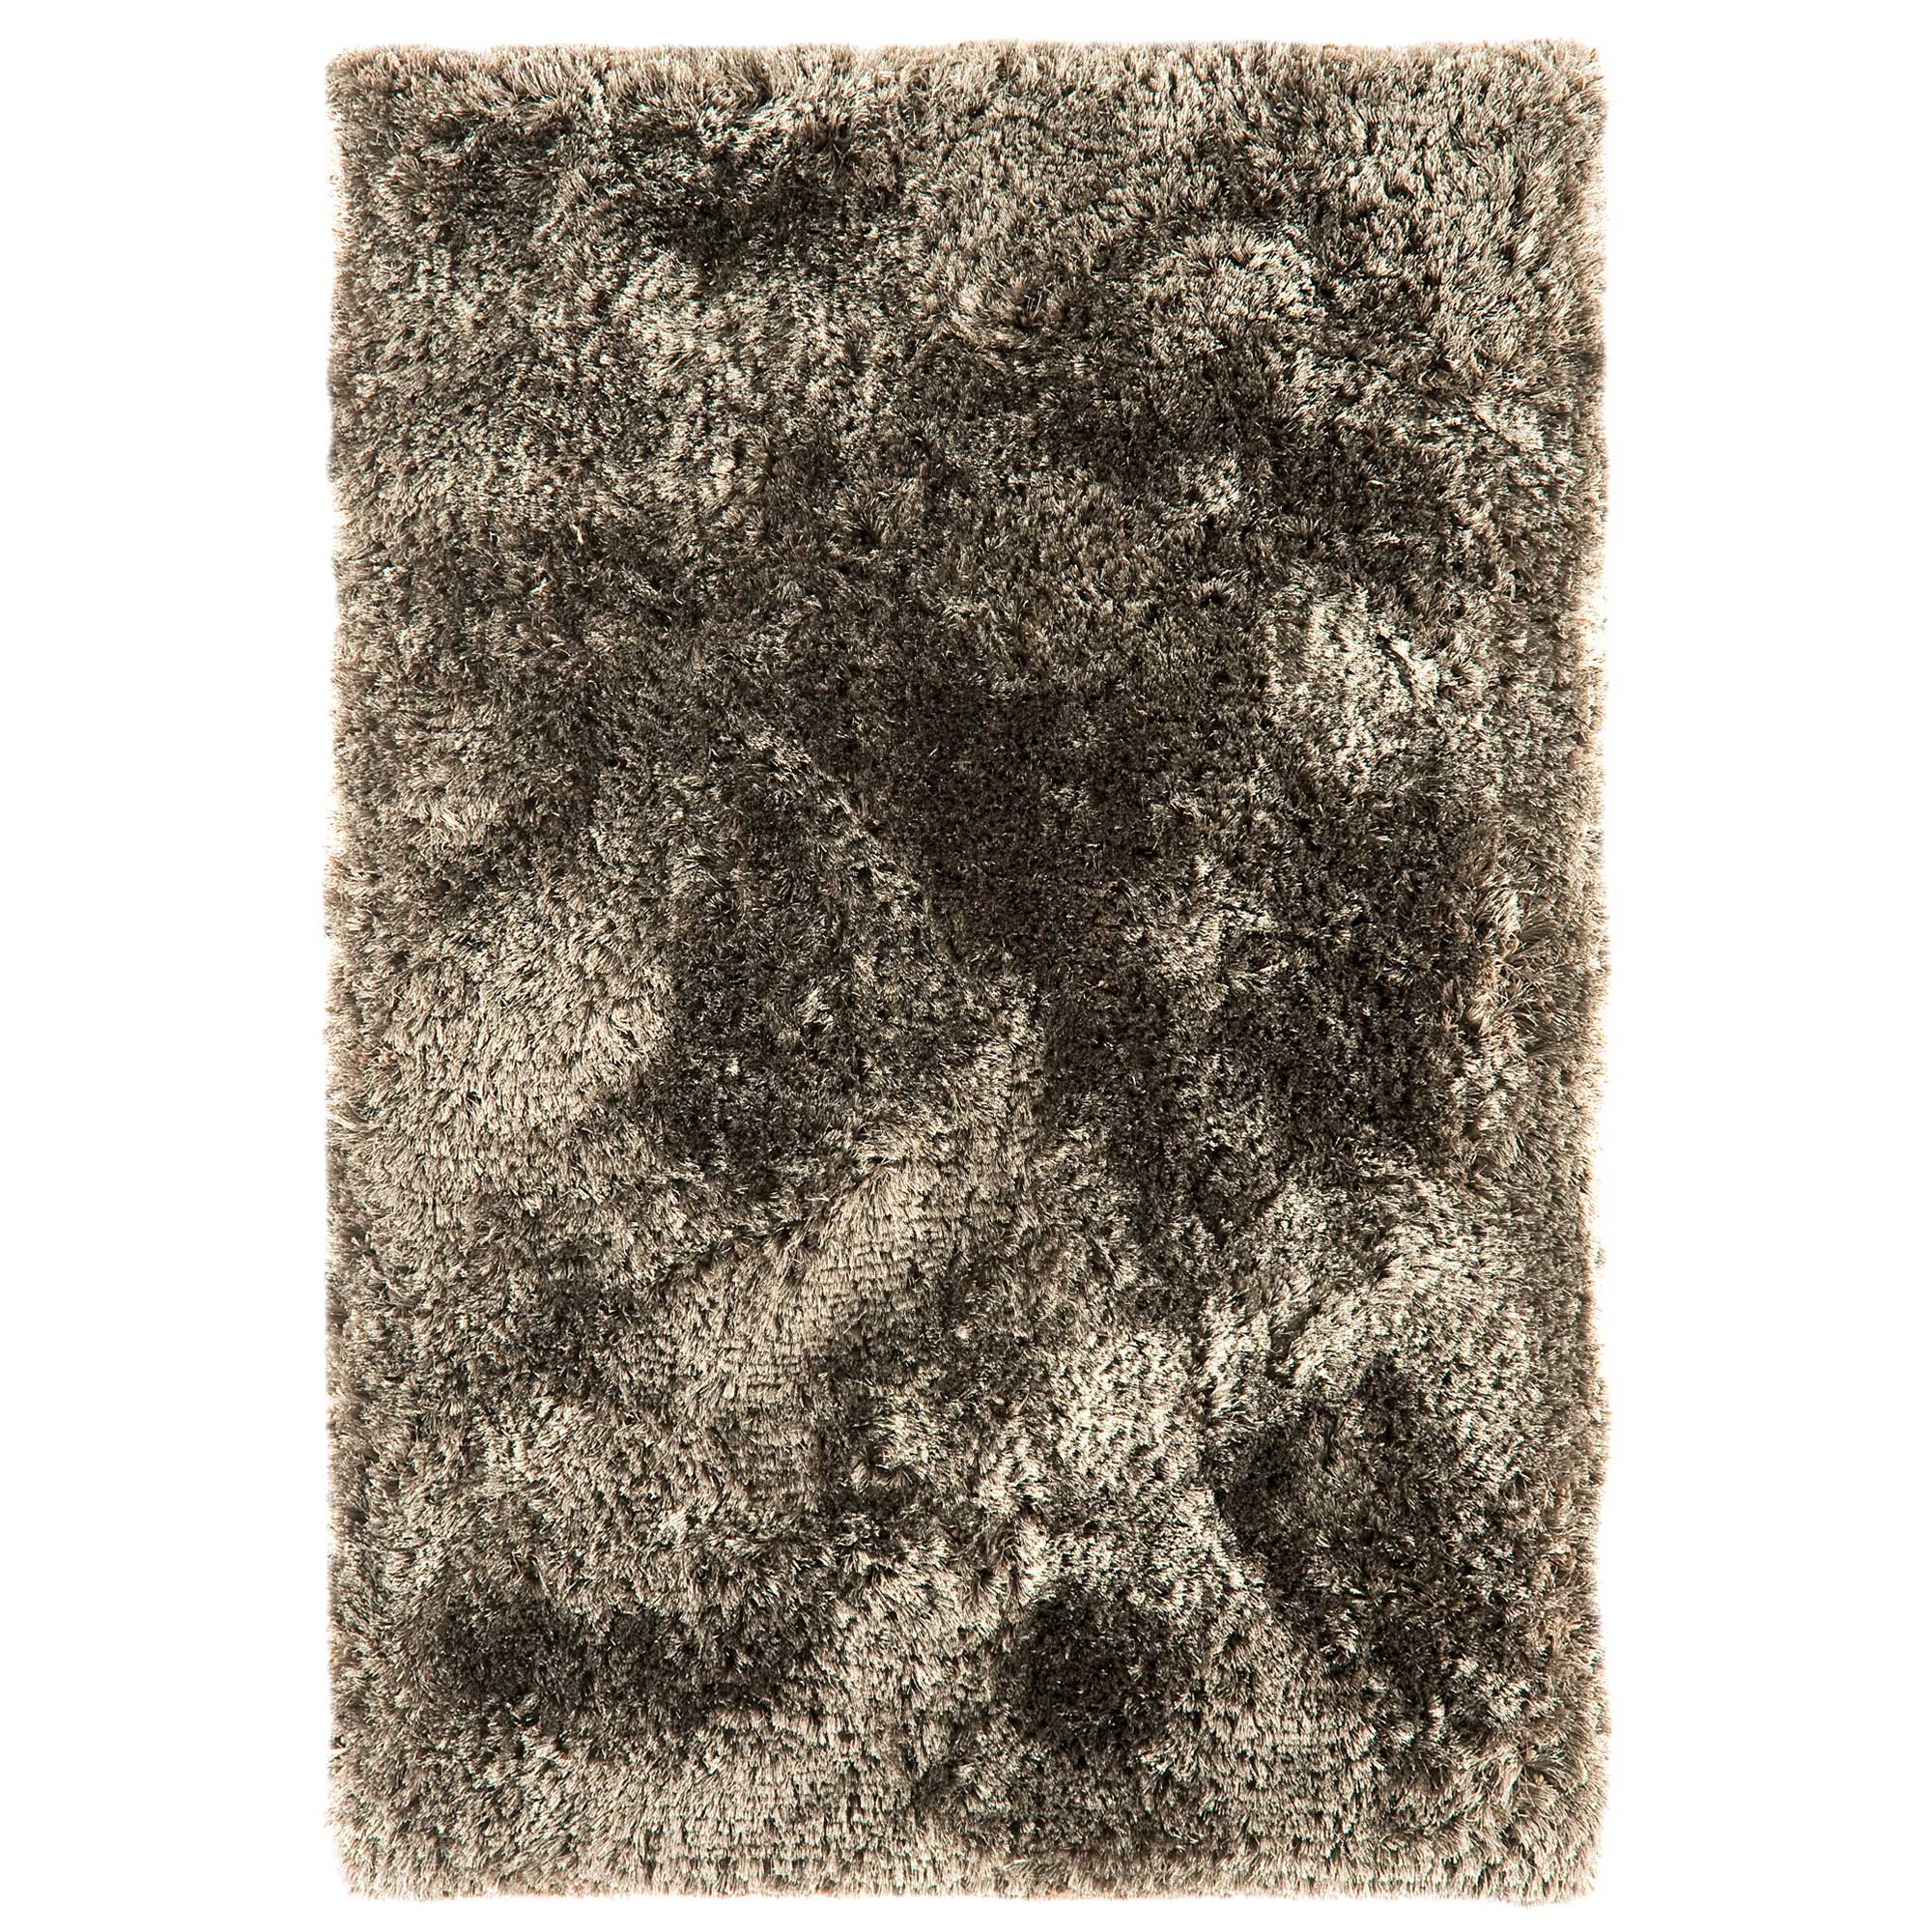 Plush Taupe 120x170cm Rug, Square Polyester | W120cm | Barker & Stonehouse